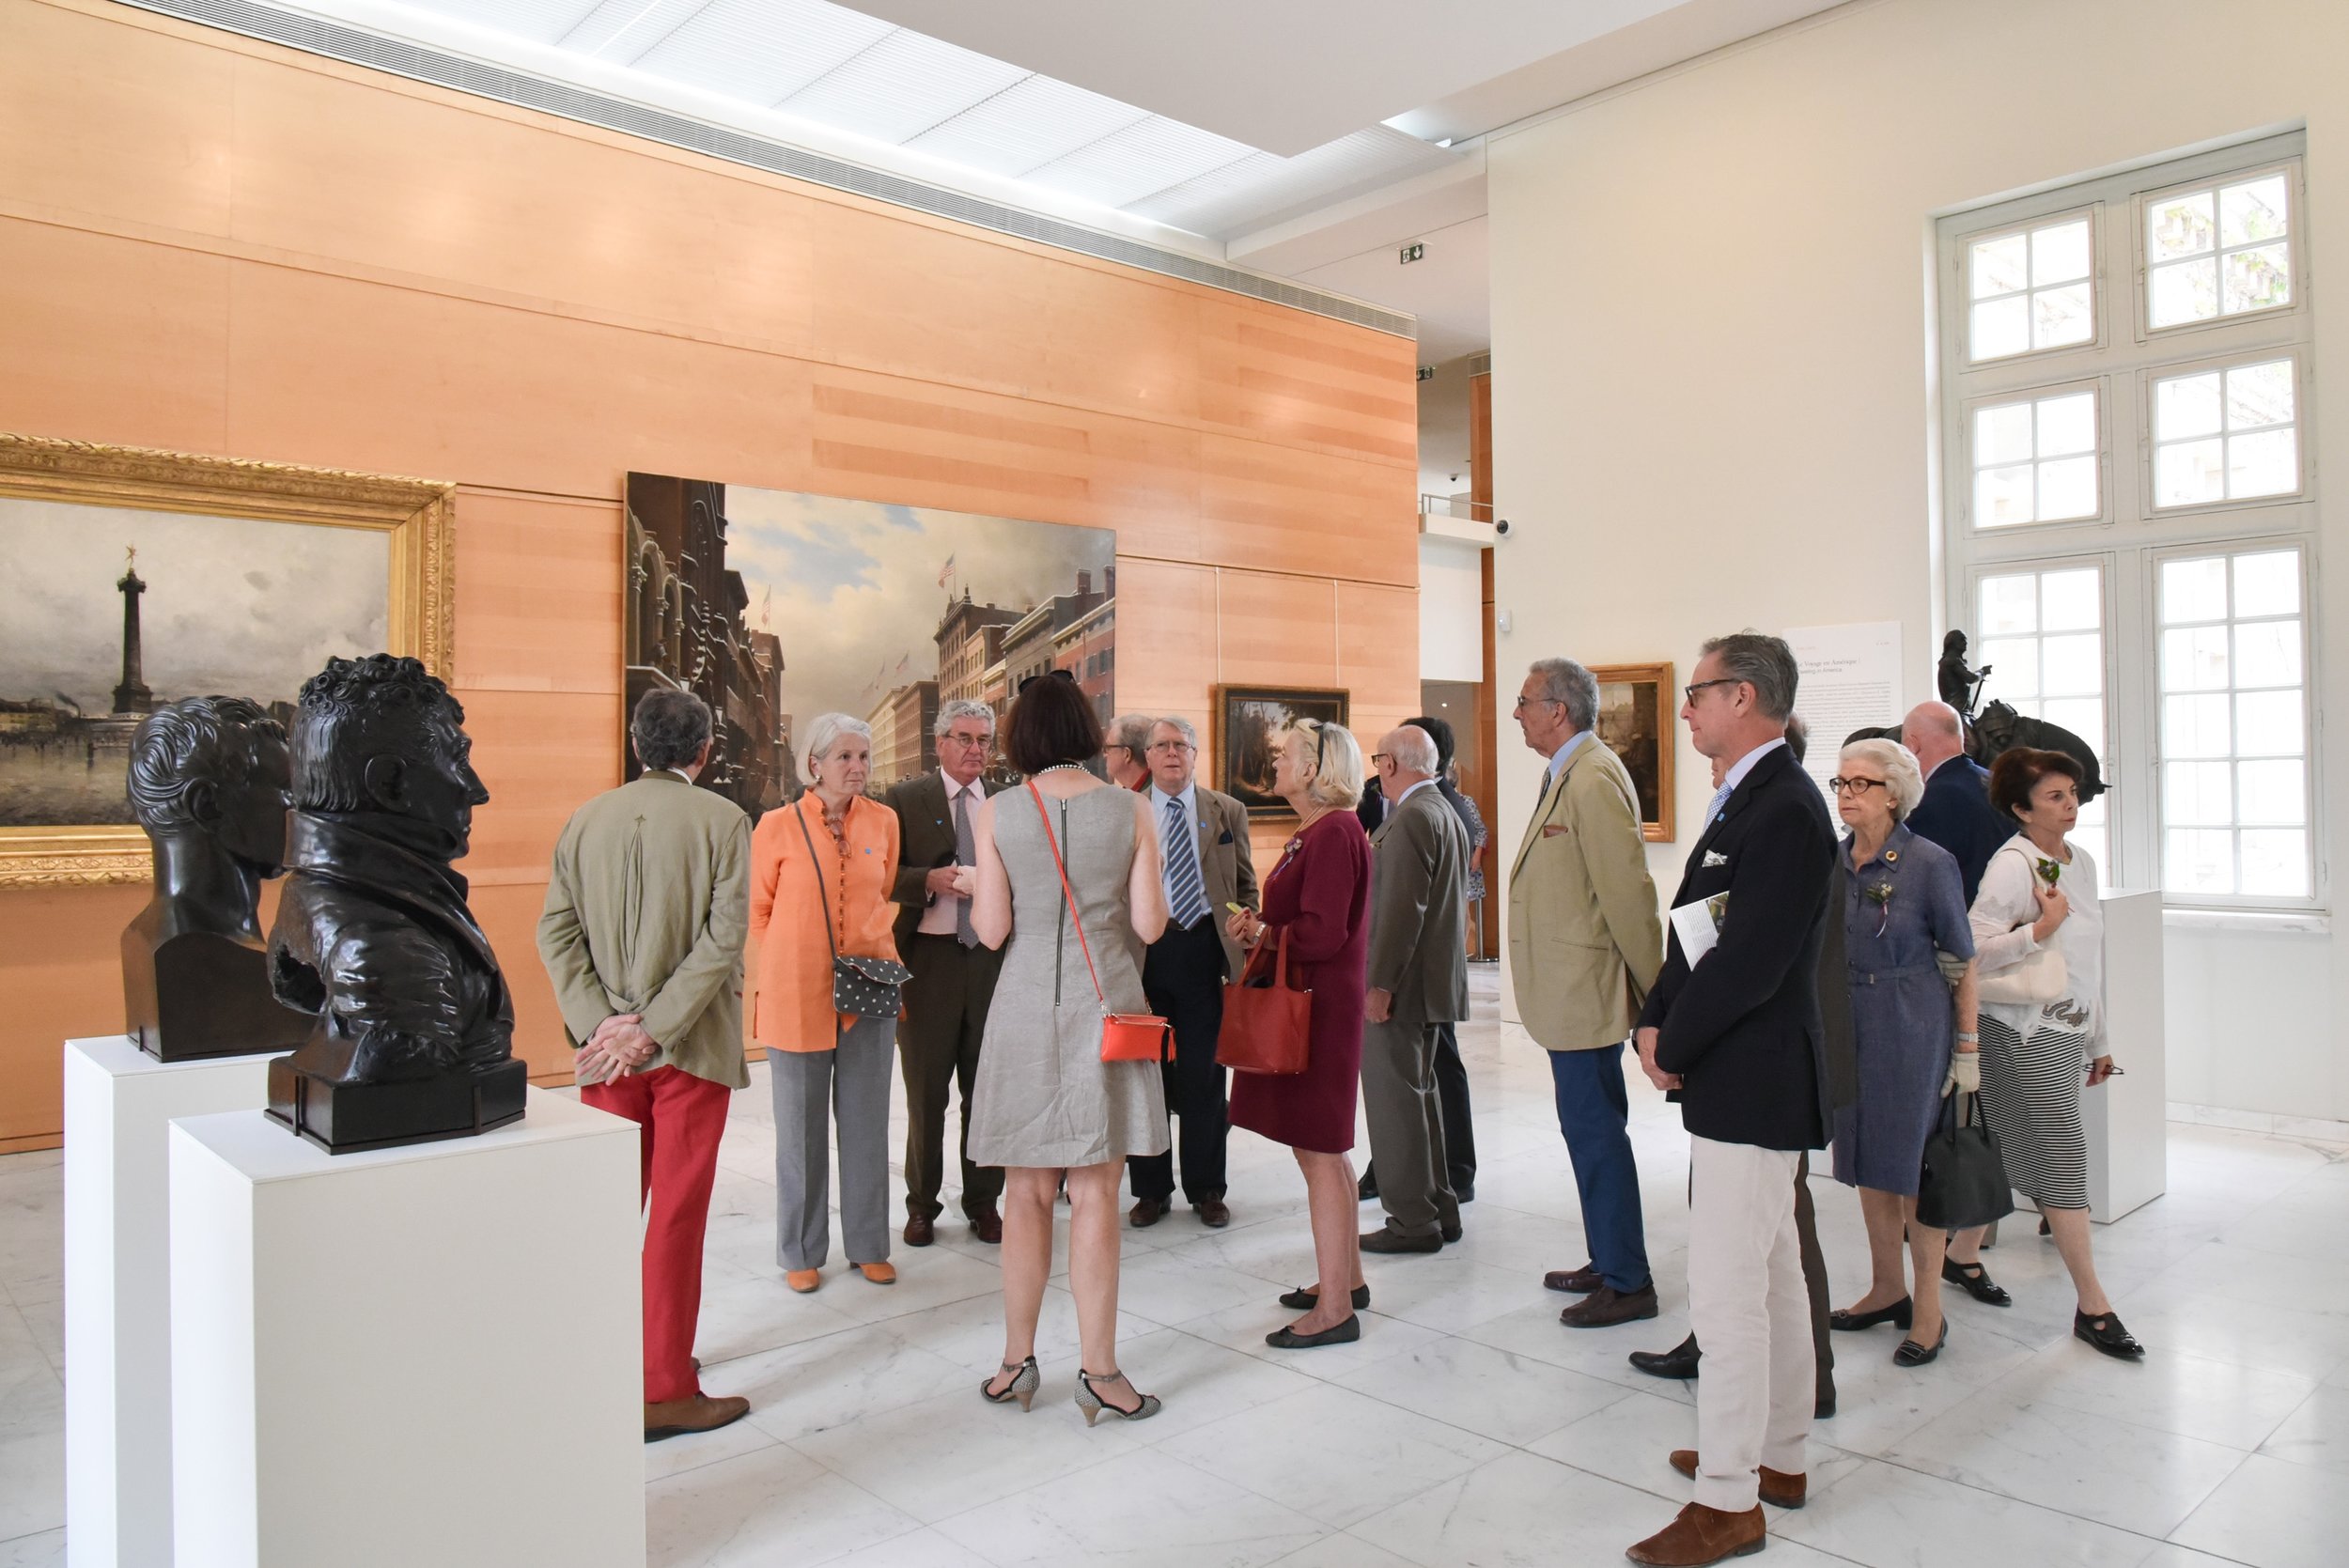  Guests at The Grand Re-Opening of the Franco-American Museum at Blérancourt, France at Franco-American Museum in Blérancourt, France on 06/24/2017 (photo by Annie Watt Agency / Sipa US 